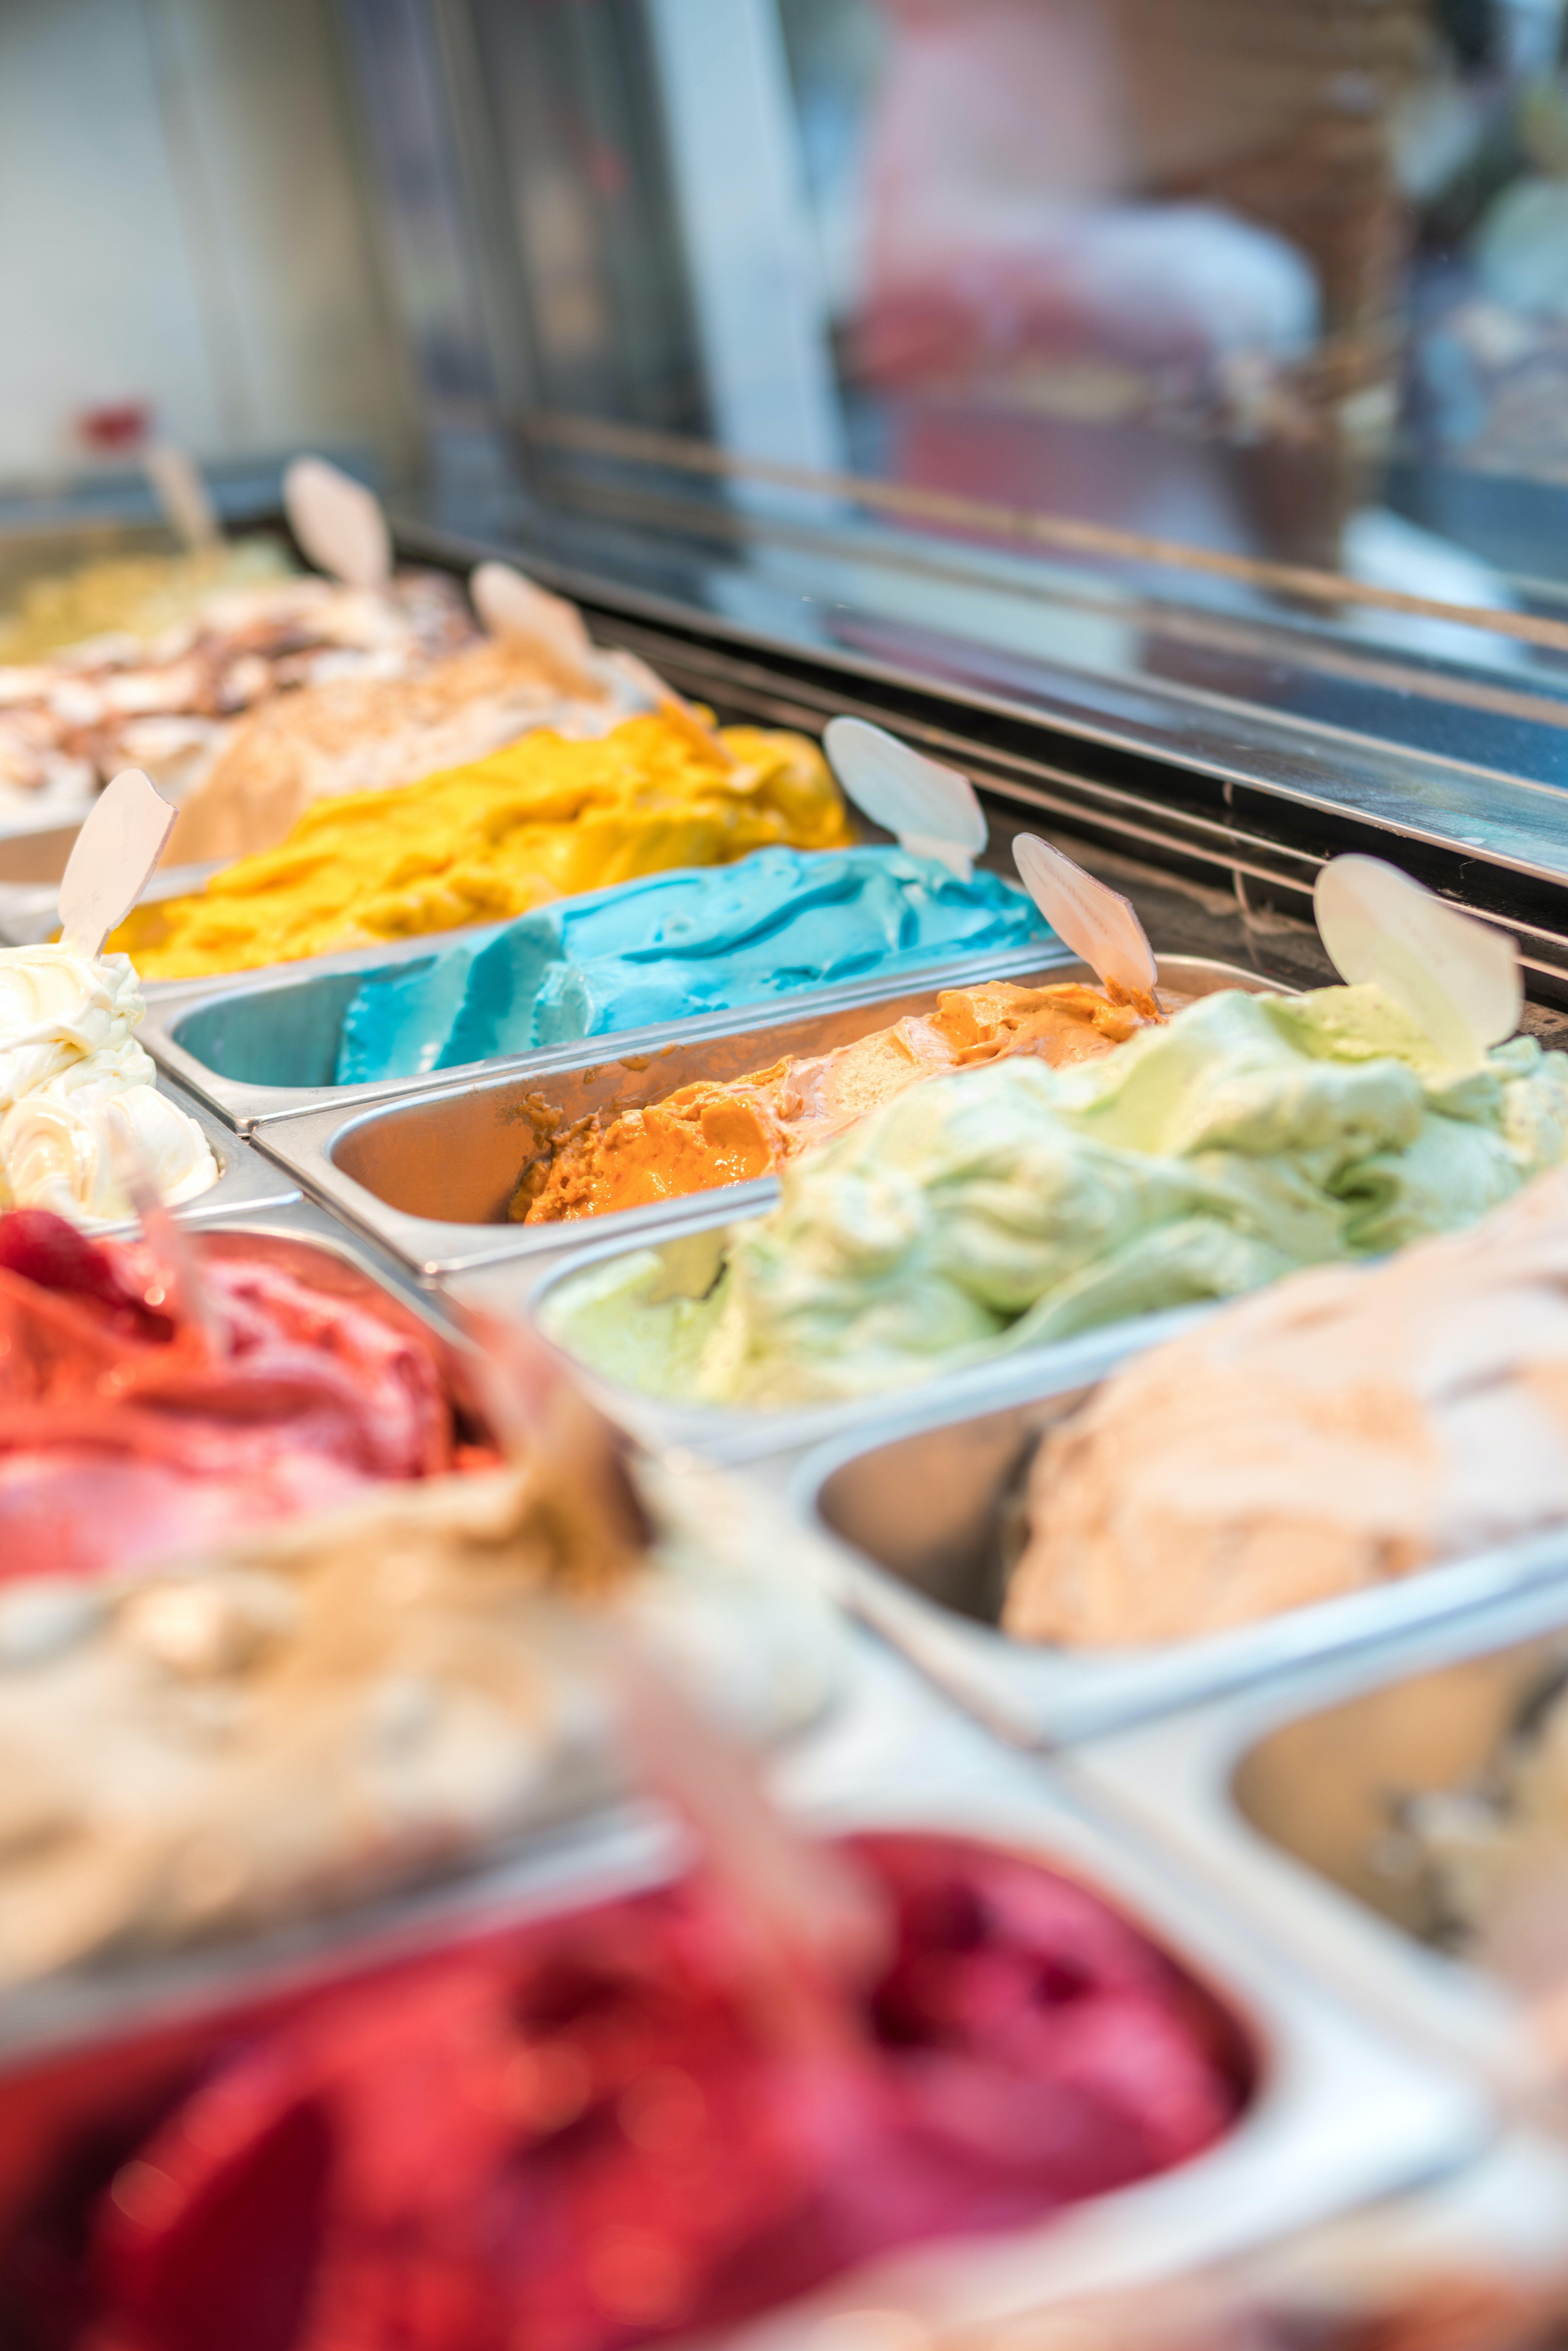 Susan and Anna went to eat some ice cream before heading home from the amusement park, which angered Laura. | Source: Pexels